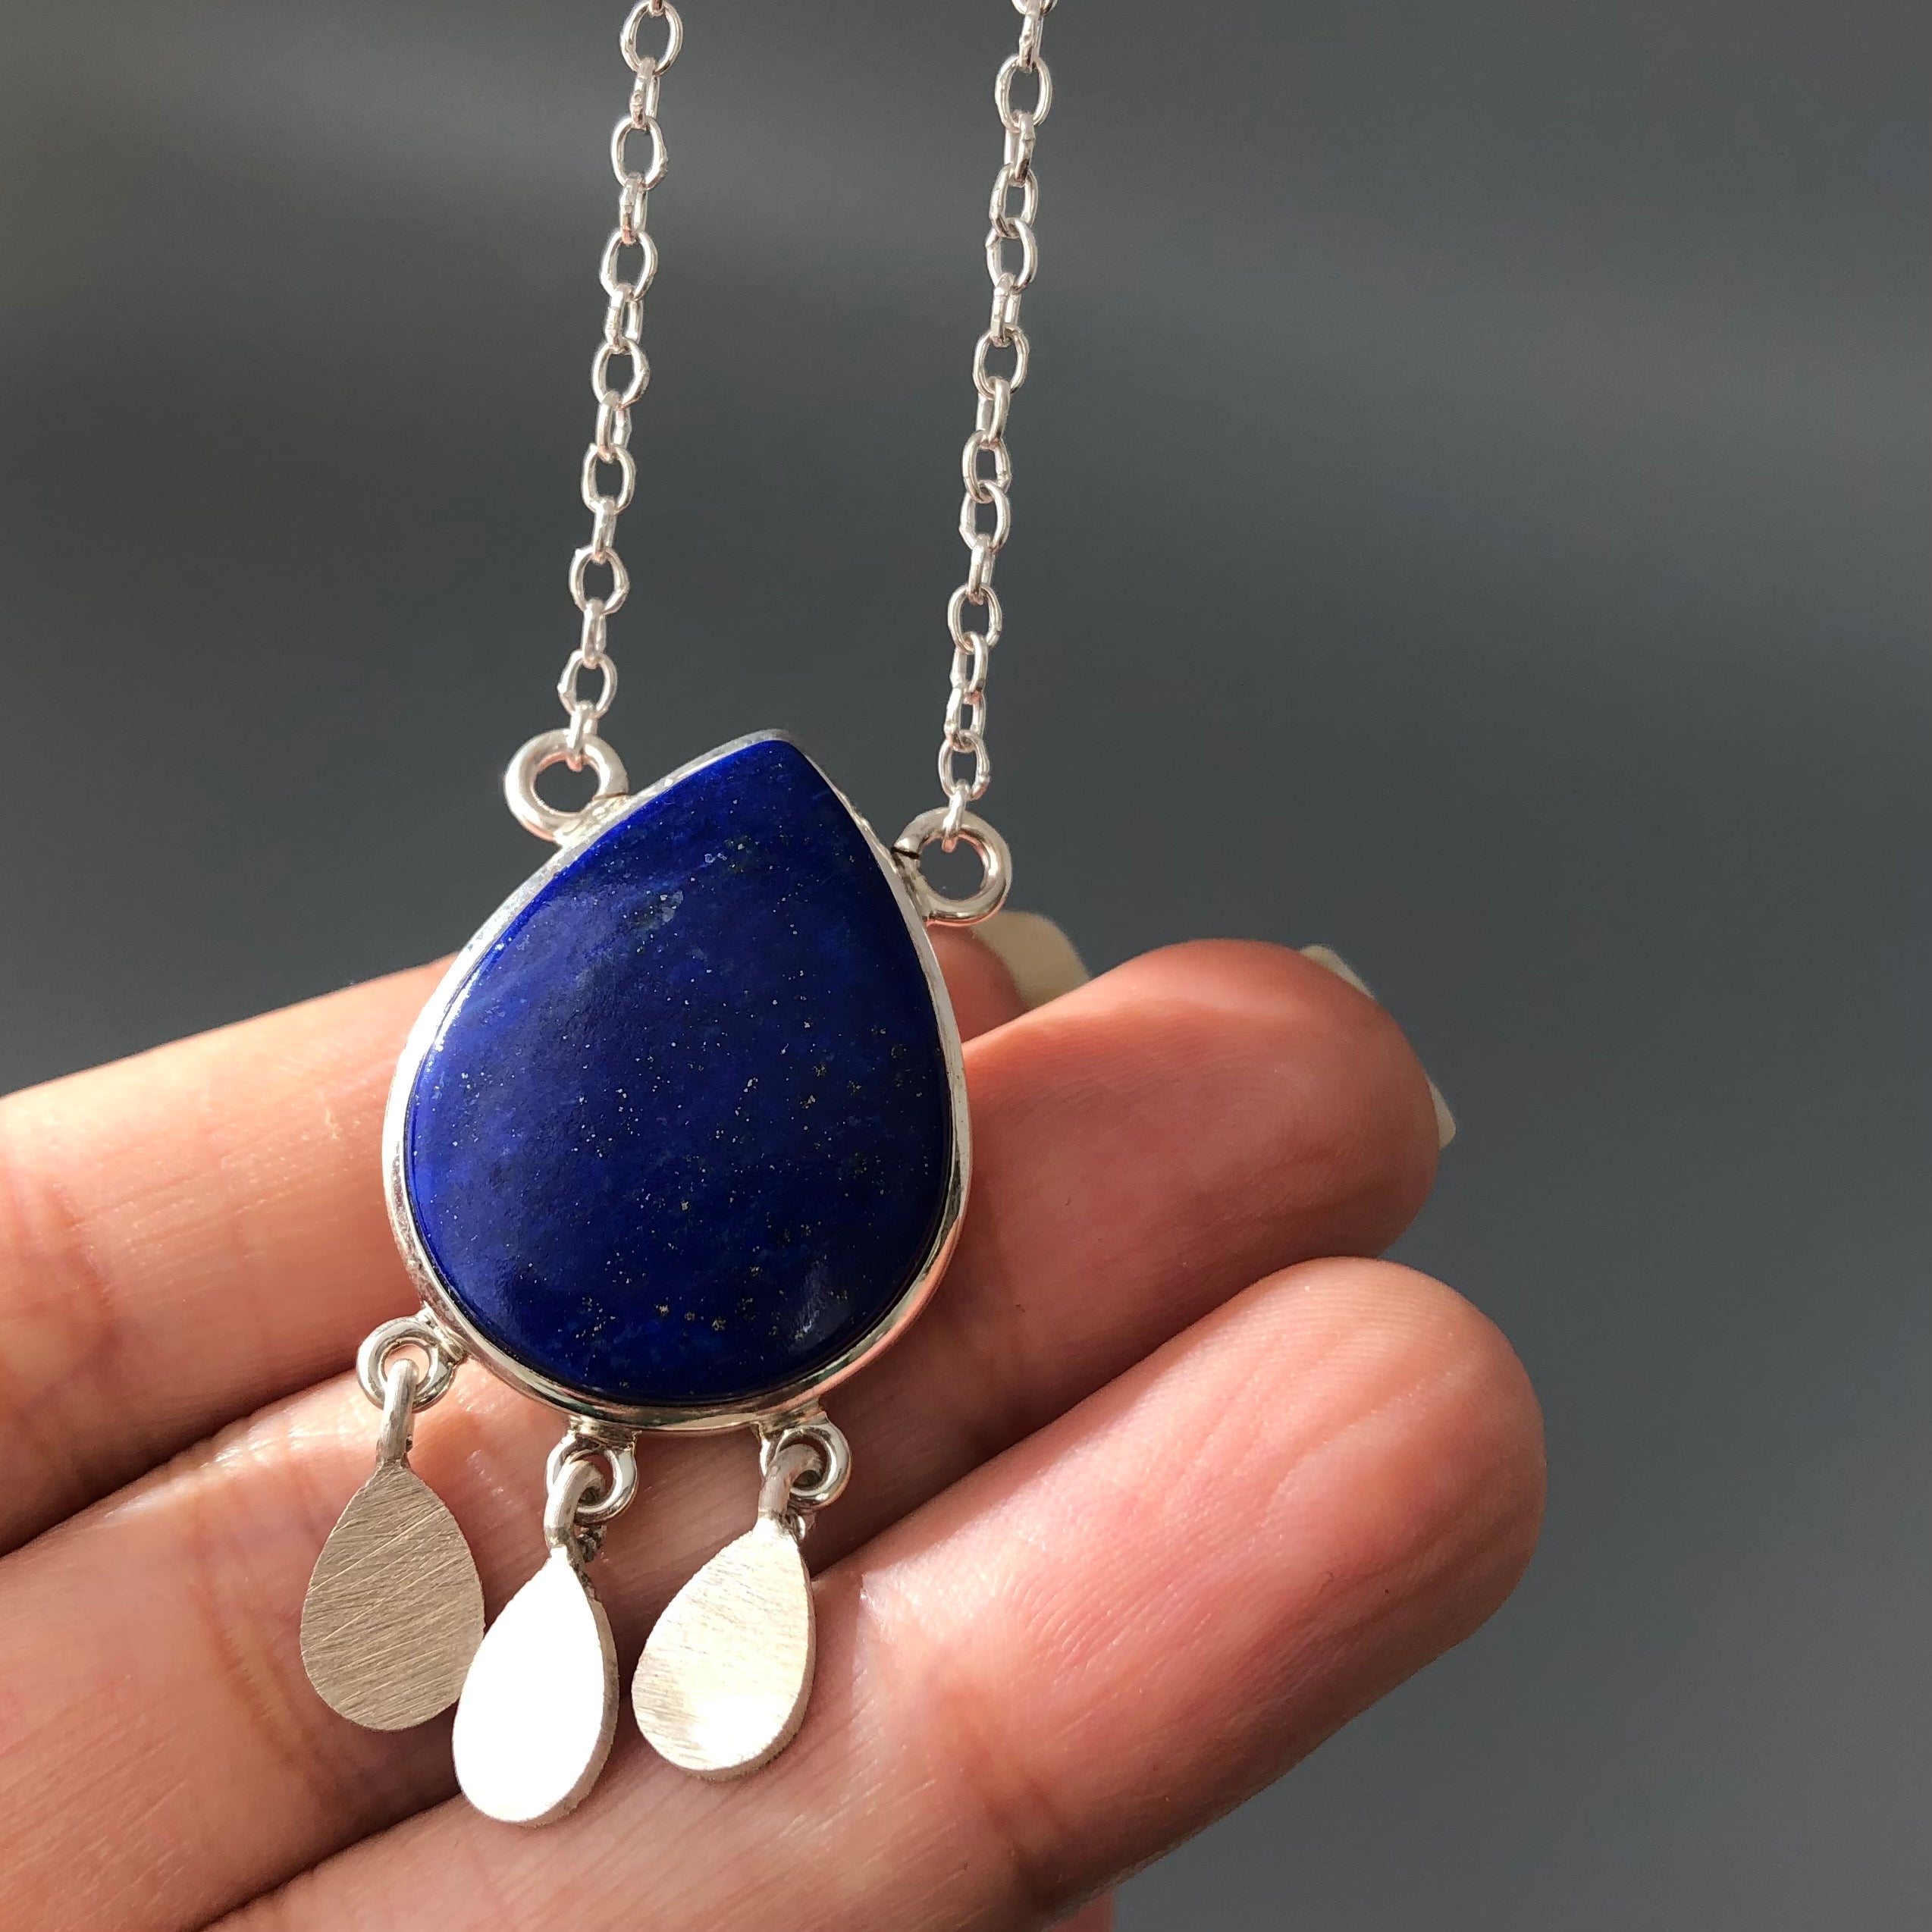 Persian Necklaces Handmade Silver Necklace with Lapis lazuli:Persian Jewelry-A ART GALLERY